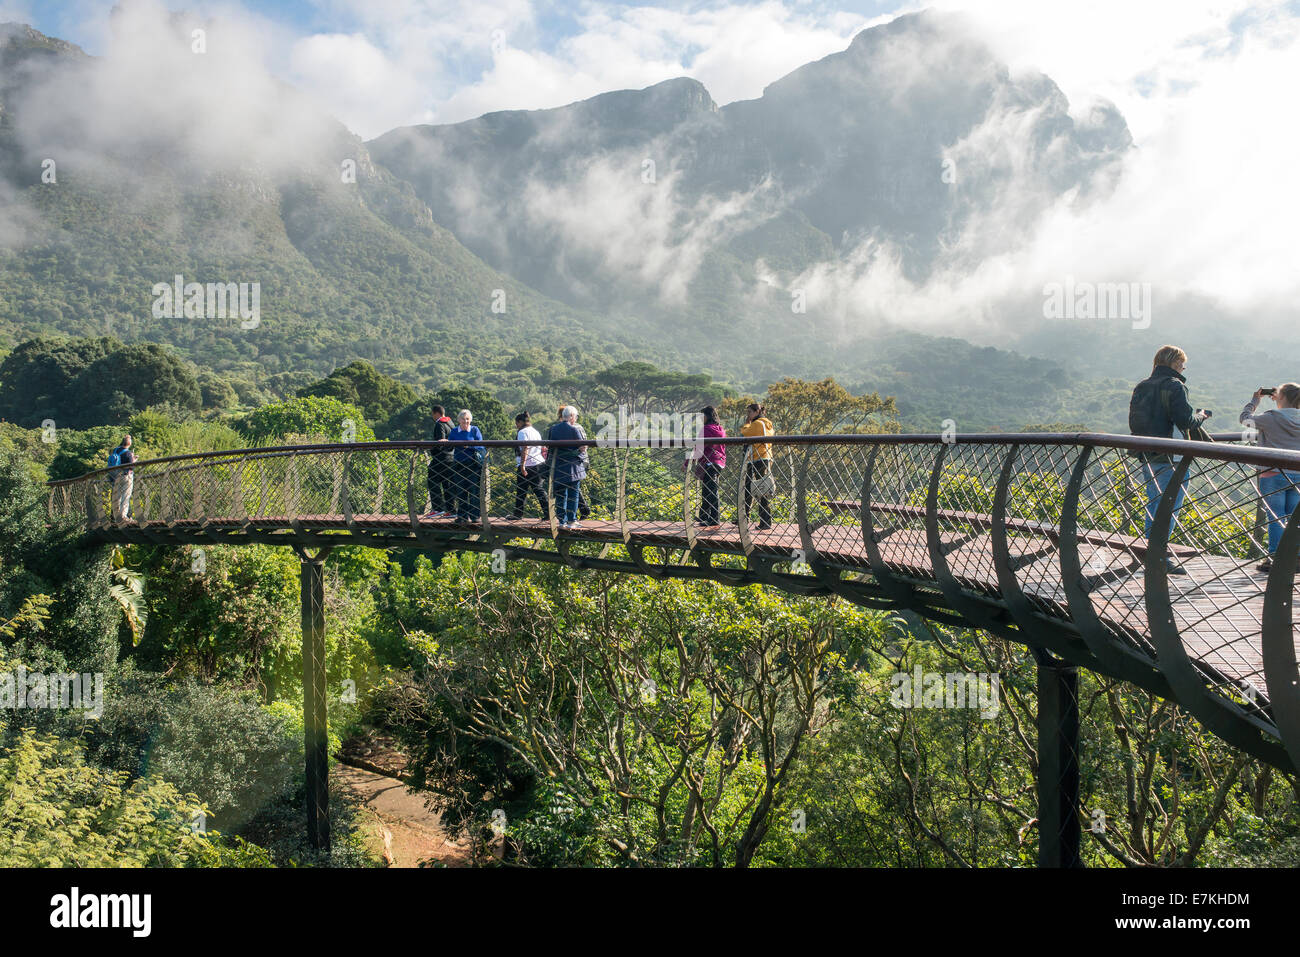 Cape Town Kirstenbosch Gardens Centenary Tree Canopy Walkway opened in May 2014 to celebrate 100 years of the gardens Stock Photo